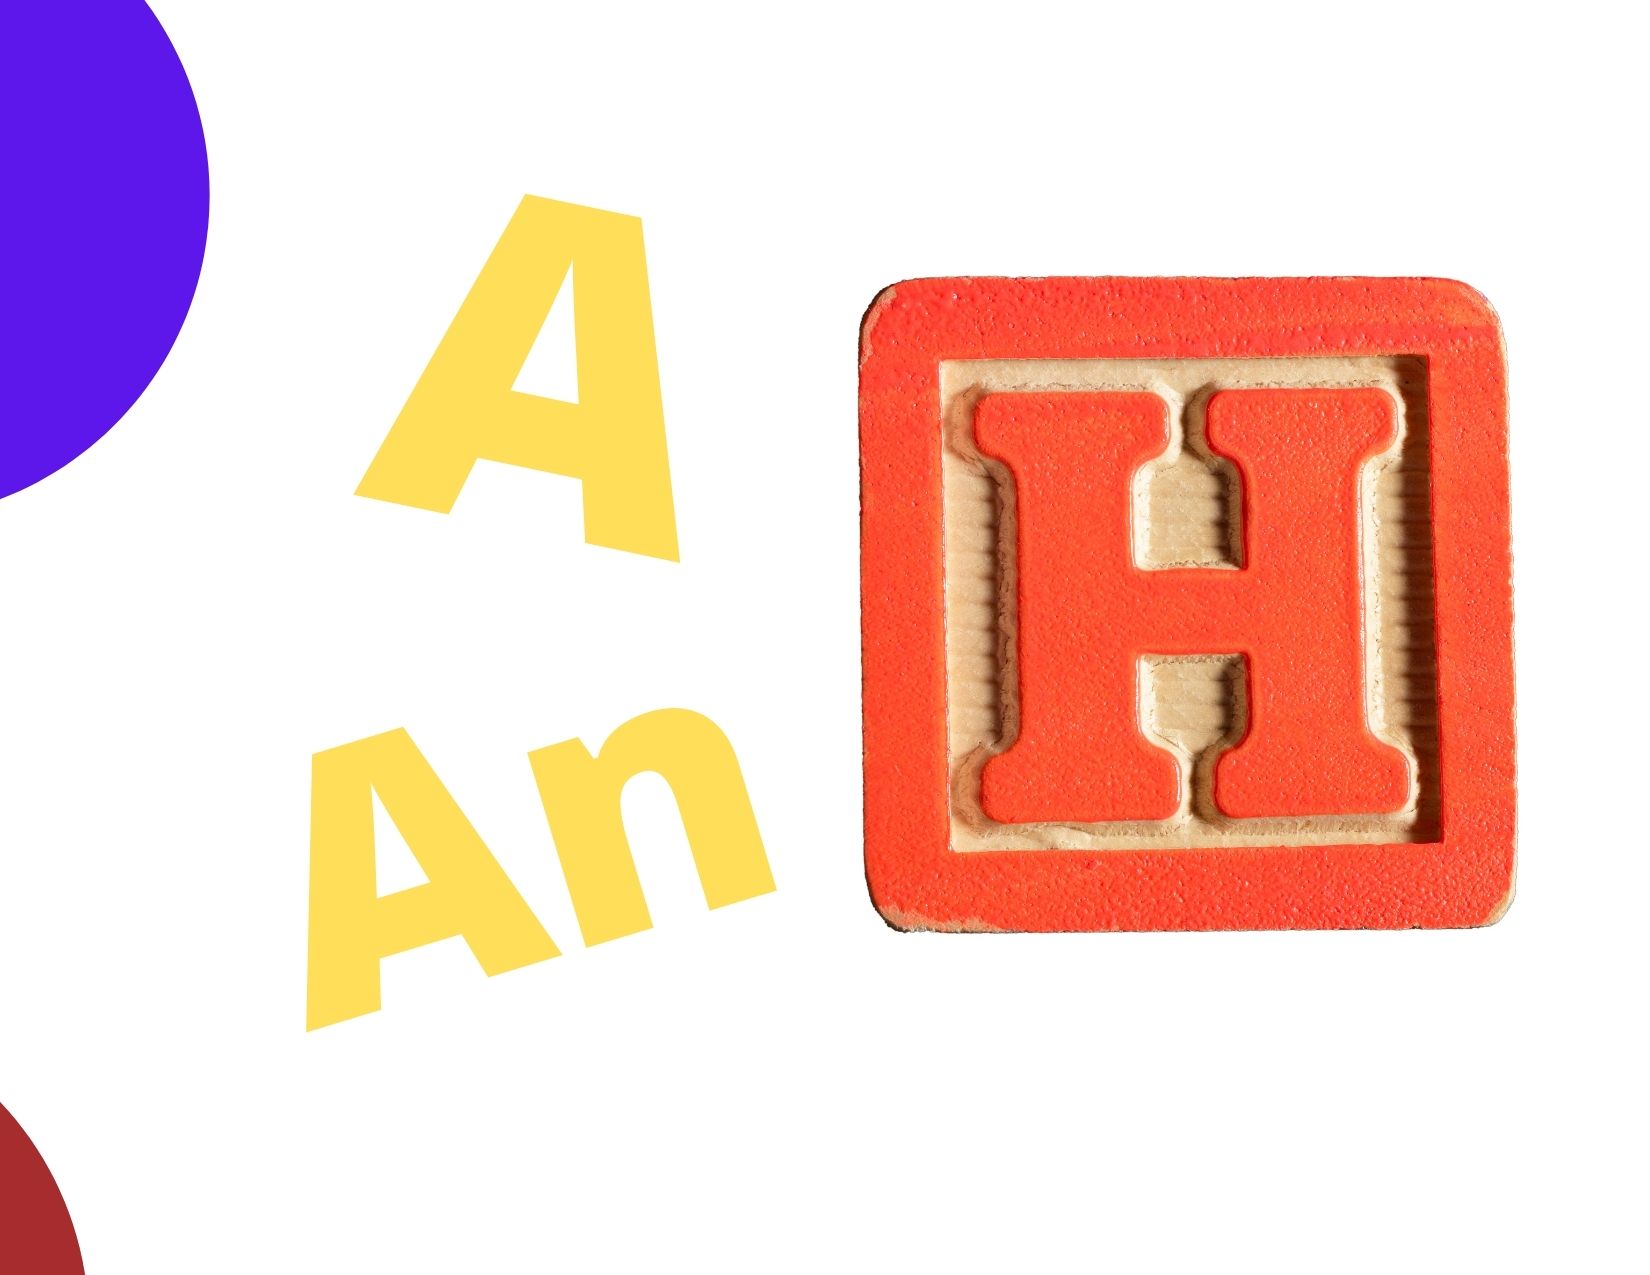 Graphic showing the articles a and an before the letter H